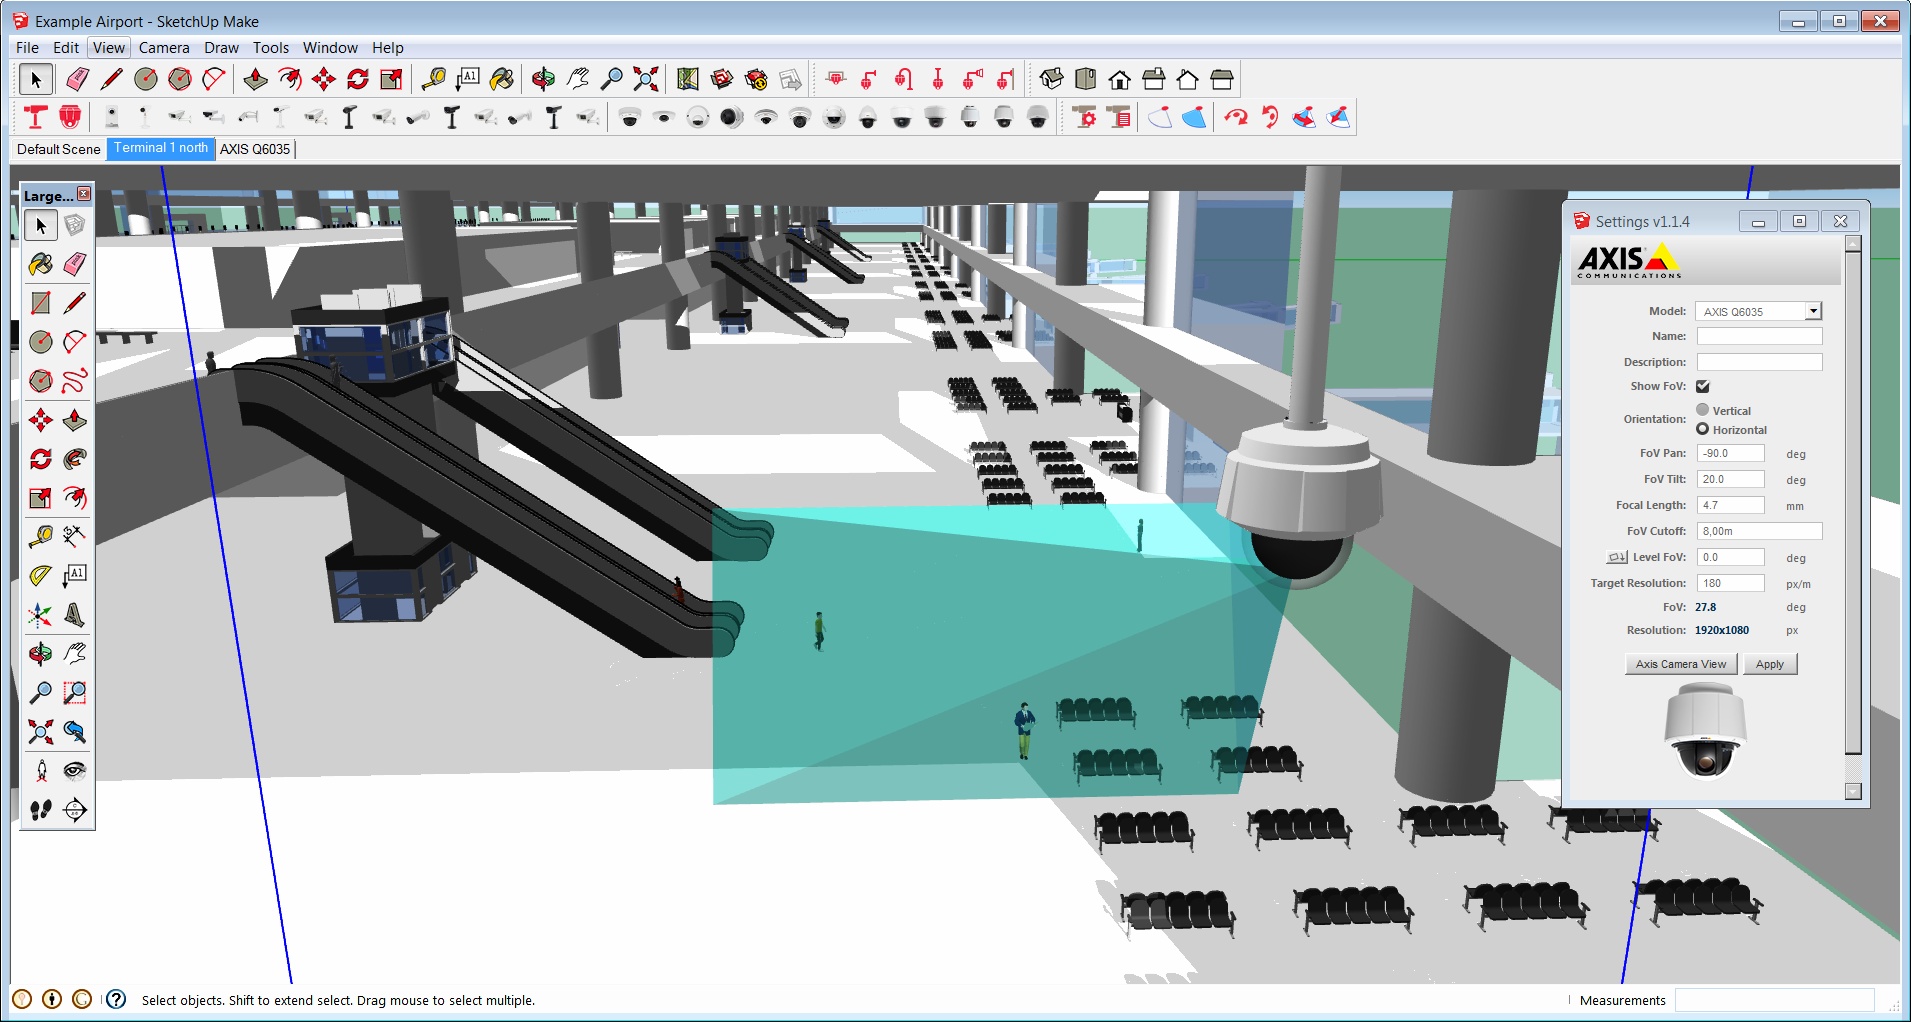 Axis Introduces Interactive Camera Visualization Tool For SketchUp 3D